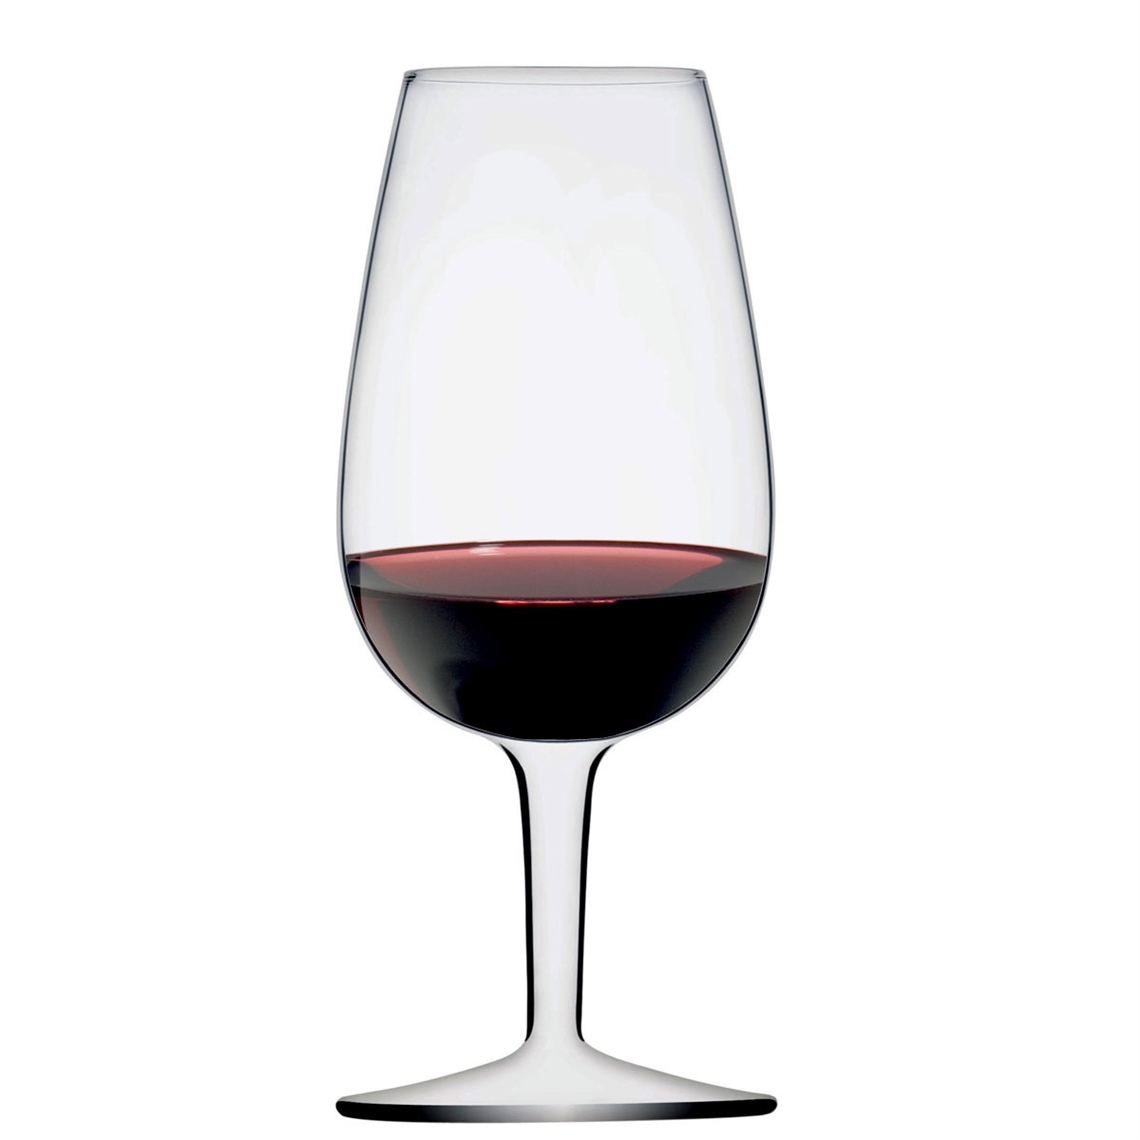 View more wine books from our Wine Tasting Glasses range